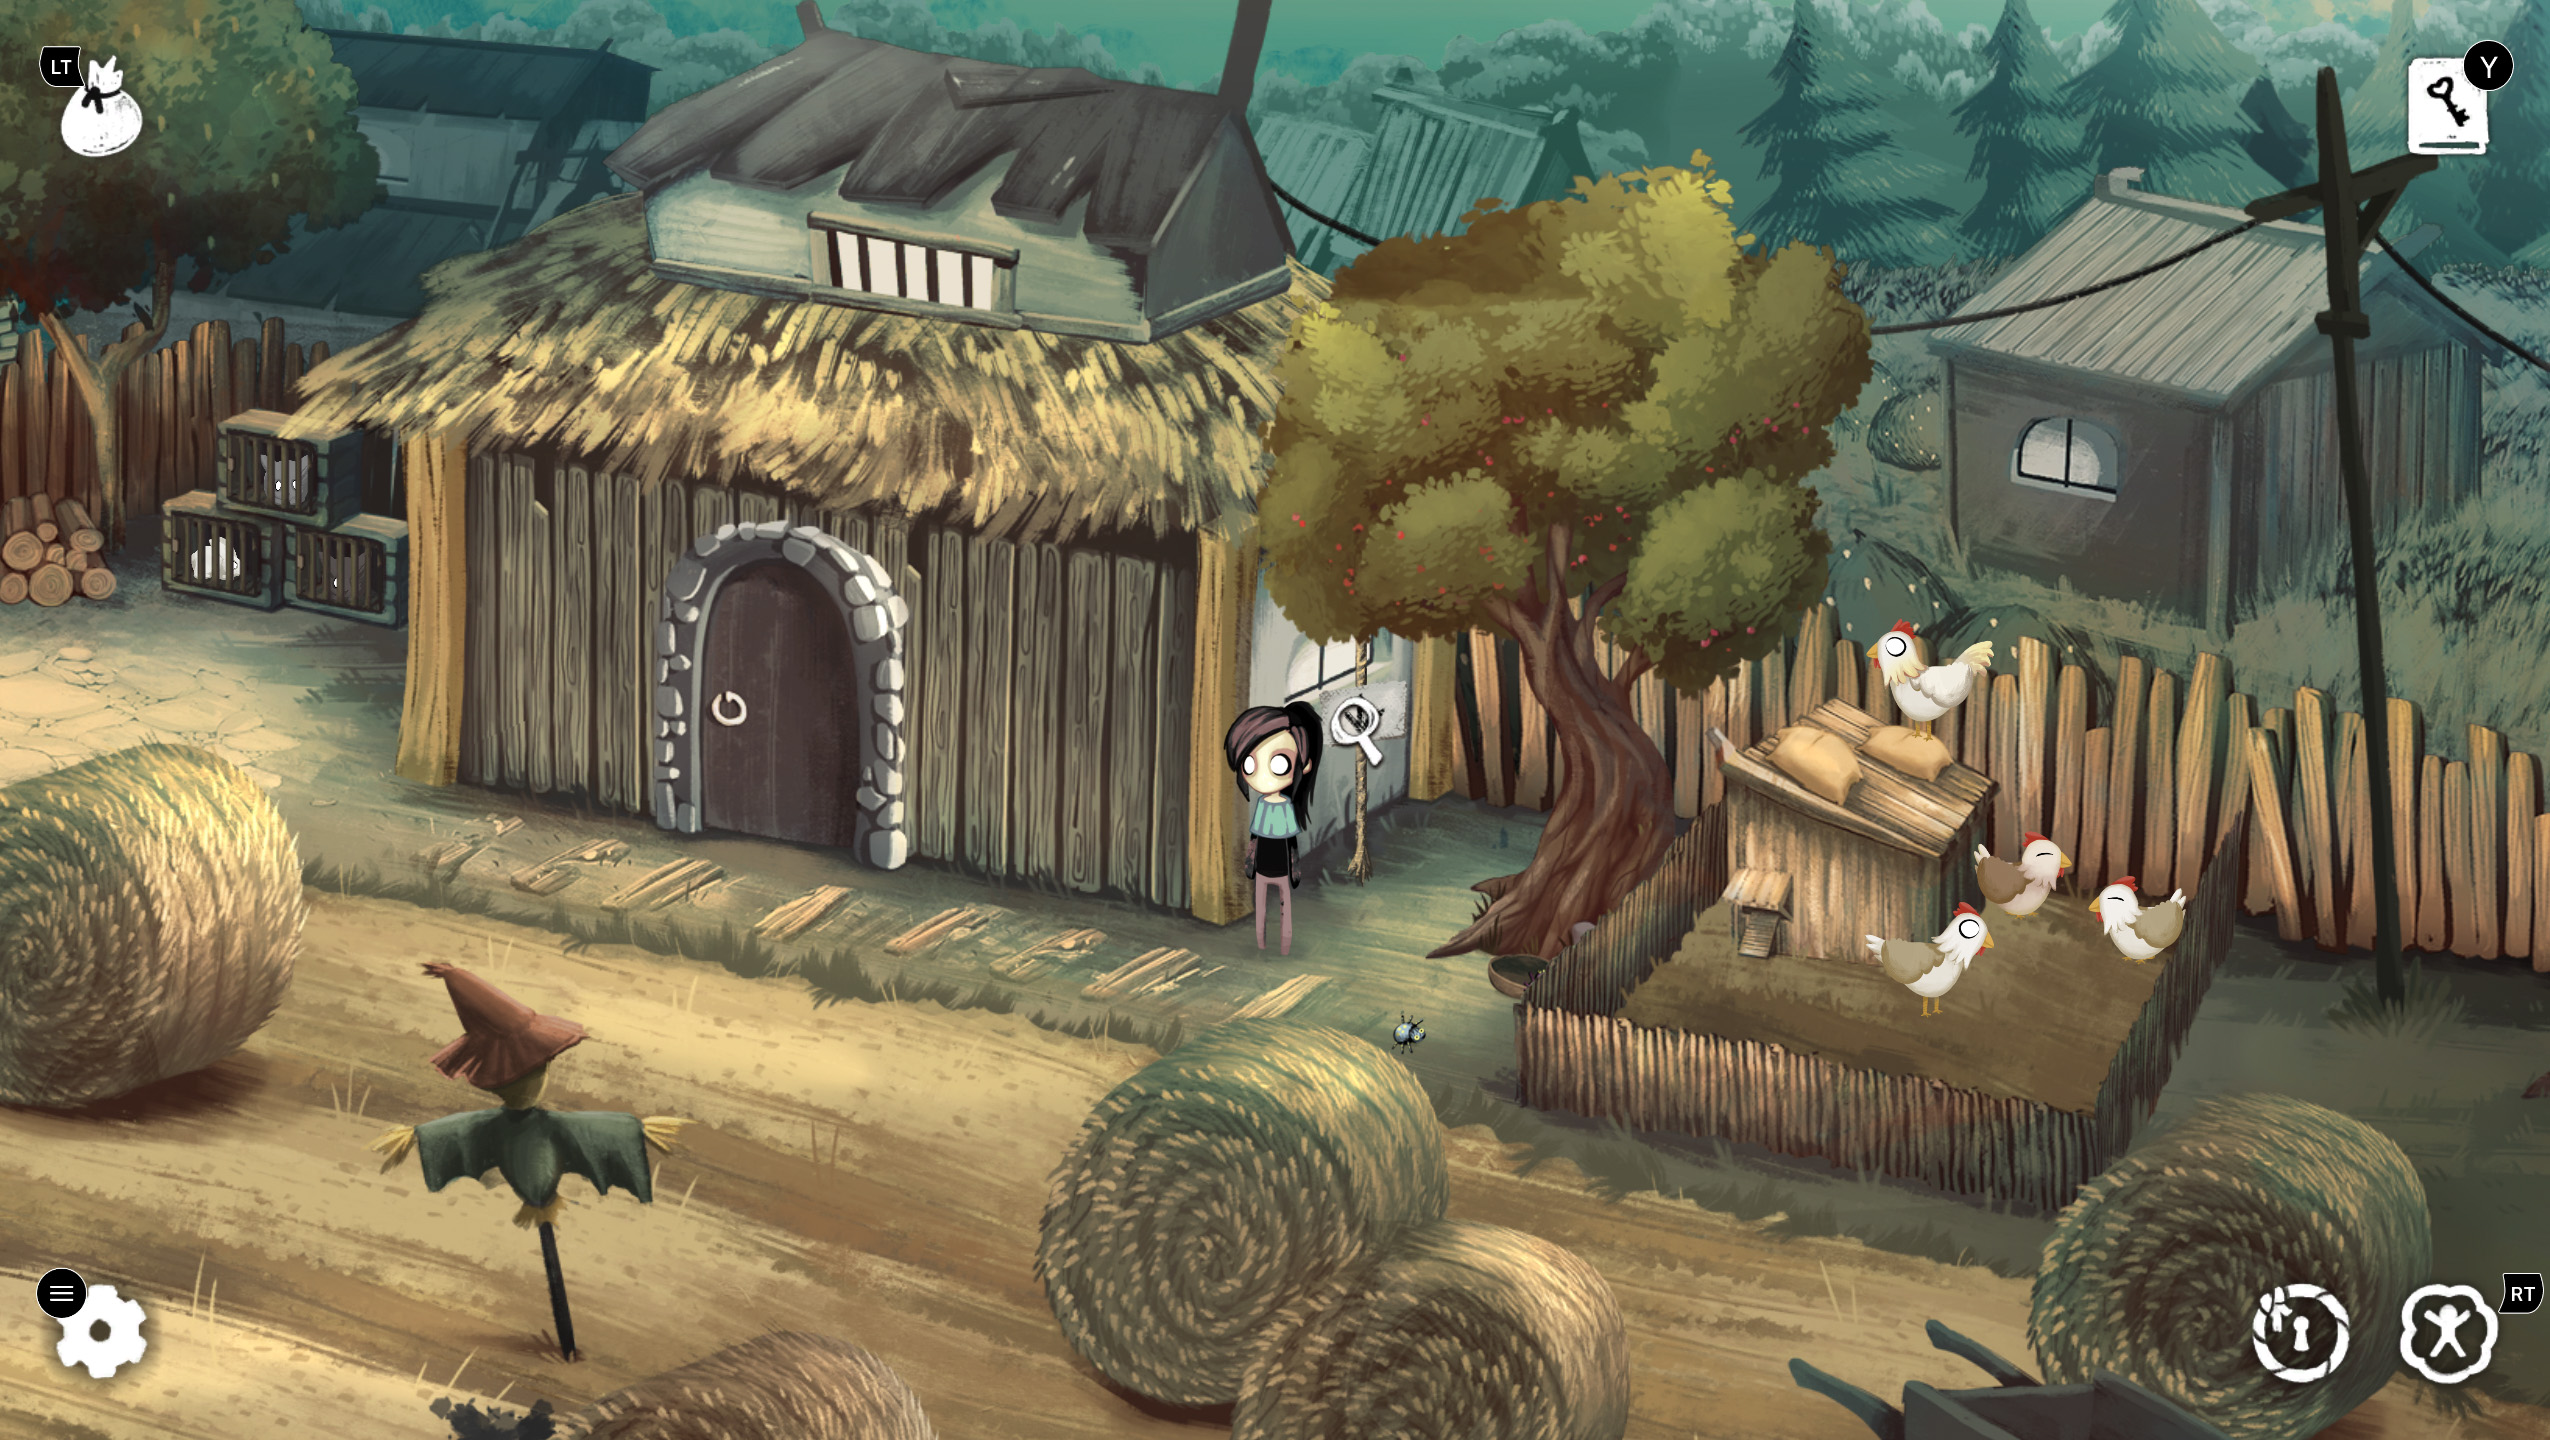 A screenshot of Lucy standing in the farmer's field in Children of Silentown.